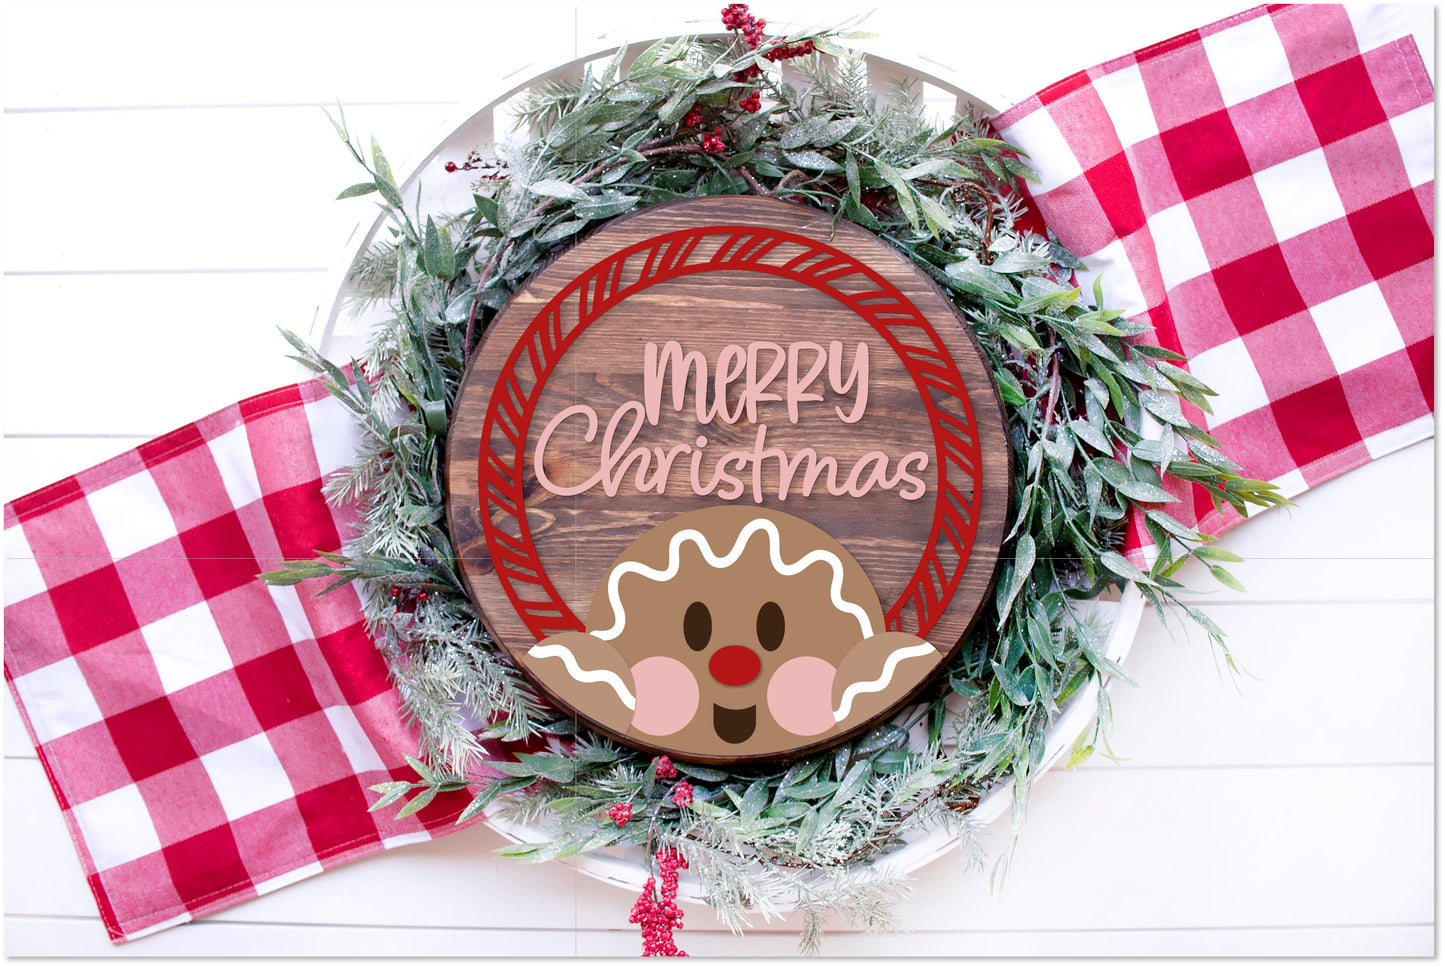 Merry Christmas gingerbread man sign